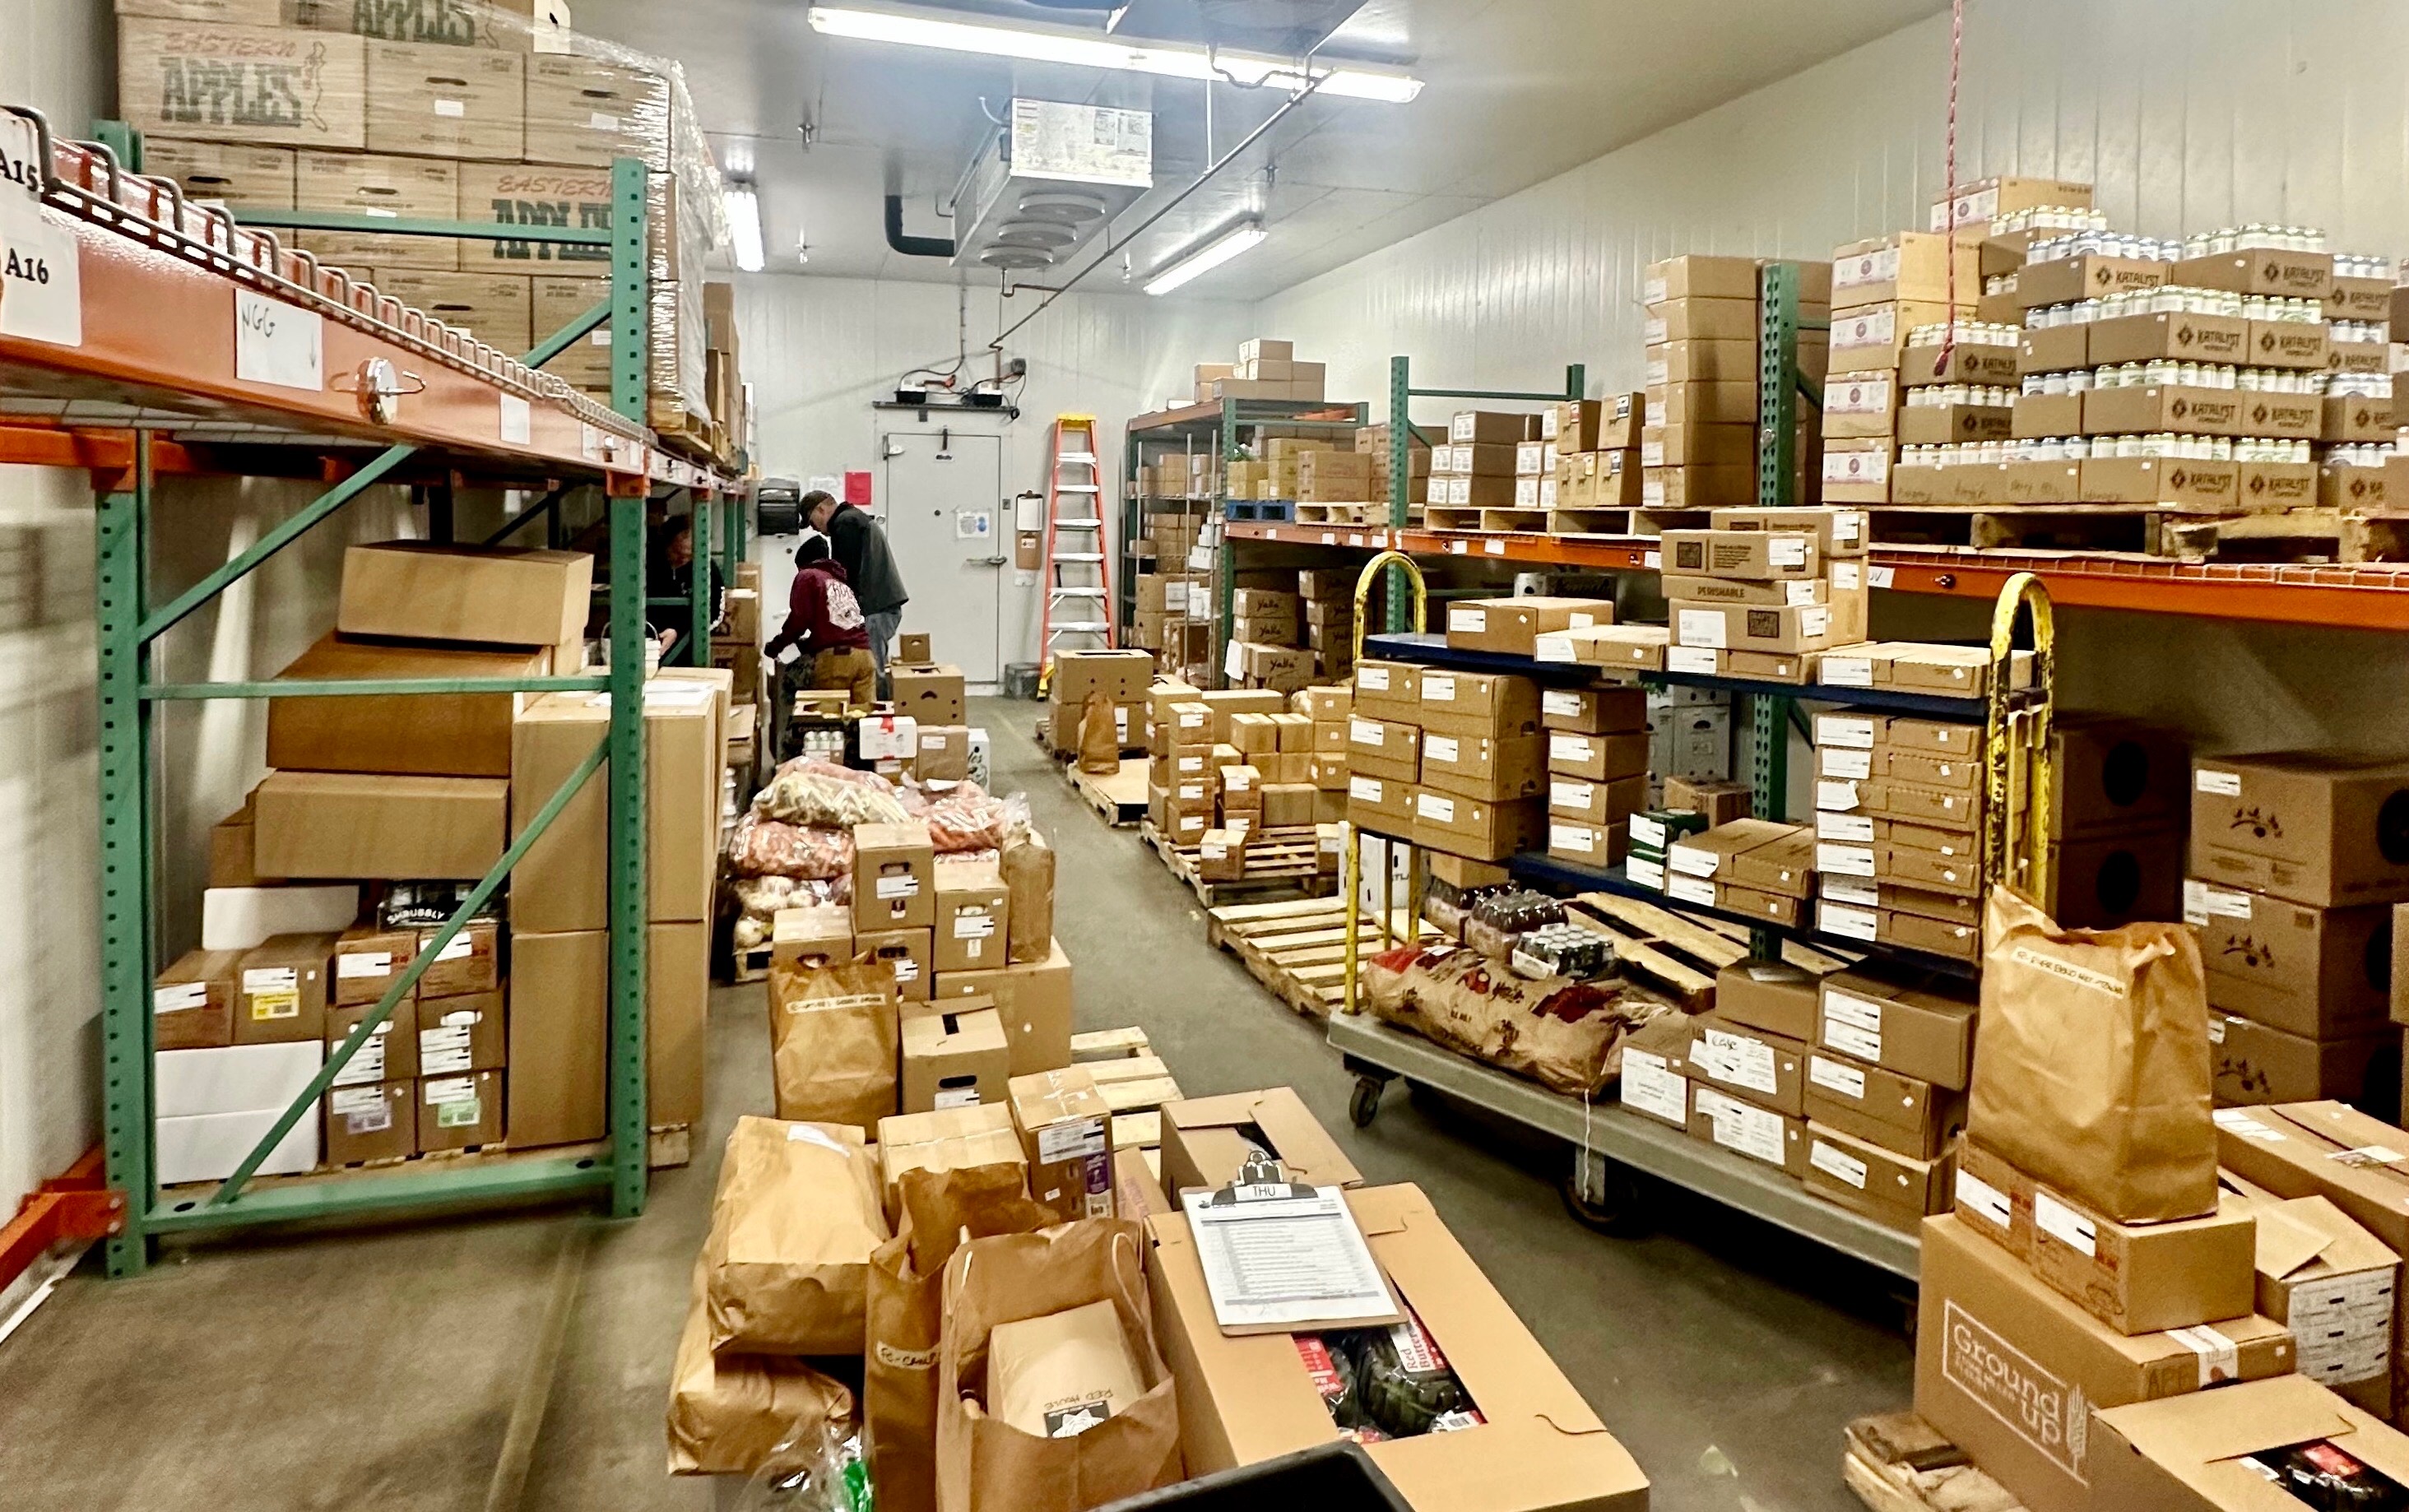 A look inside the busy Food Connects food hub warehouse